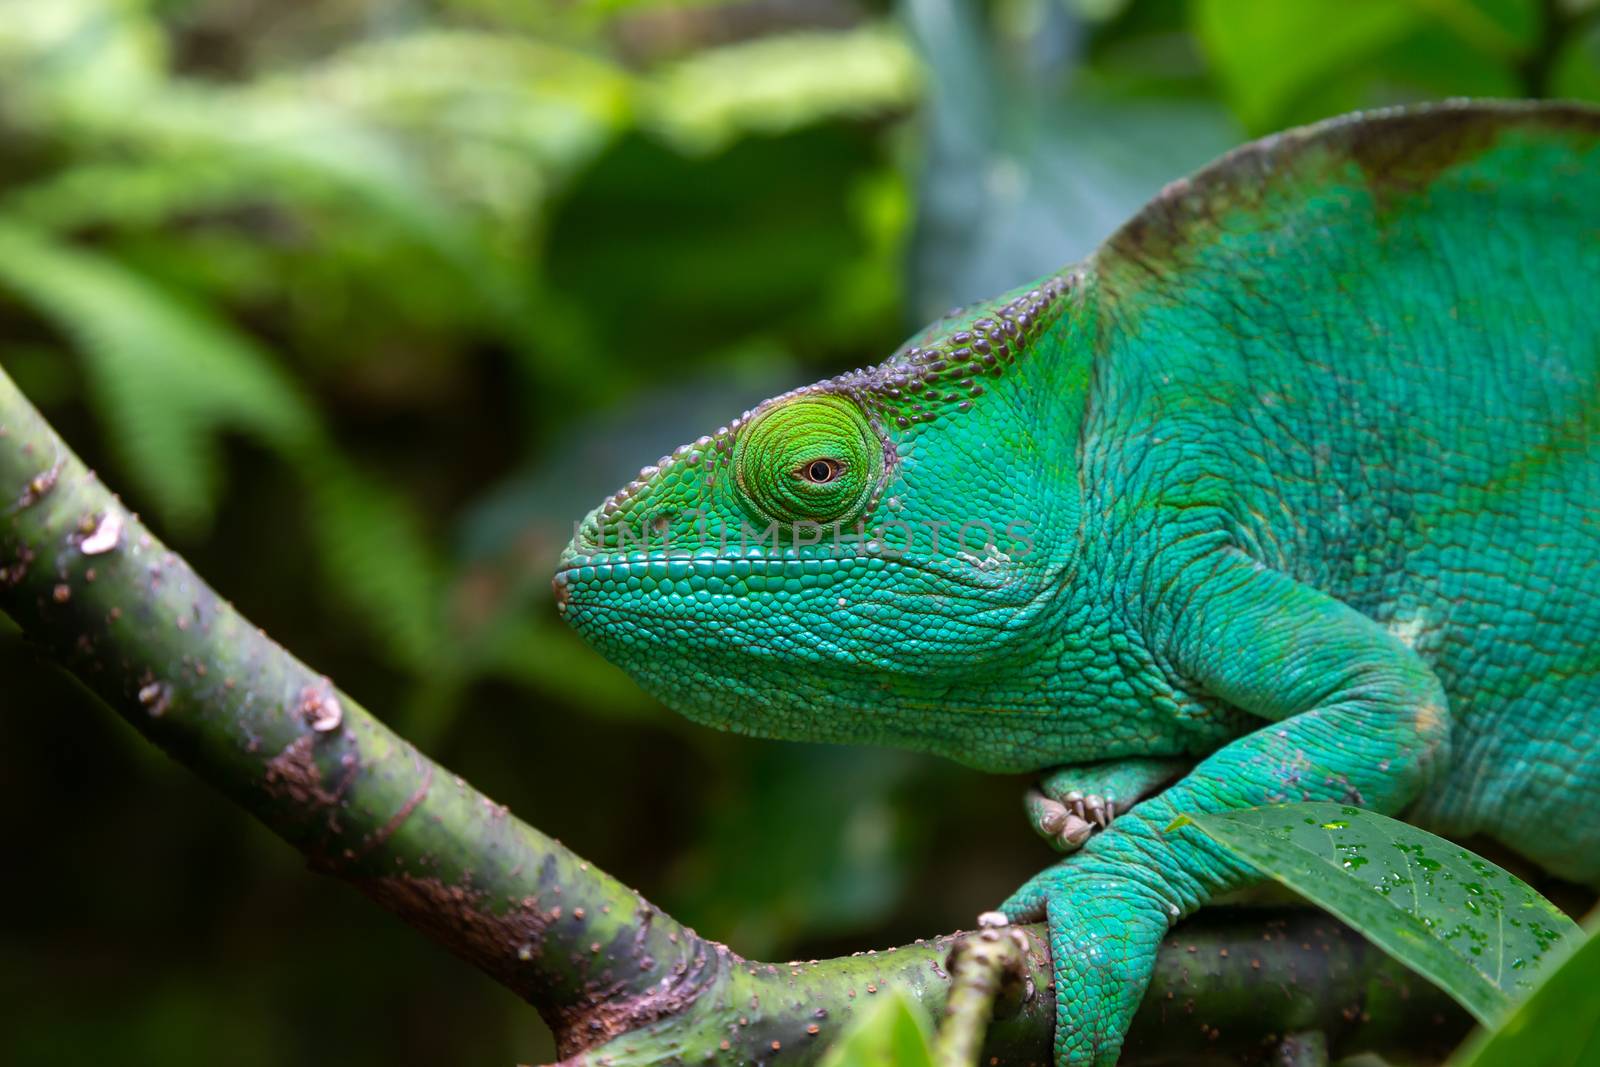 A green chameleon on a branch in close-up by 25ehaag6